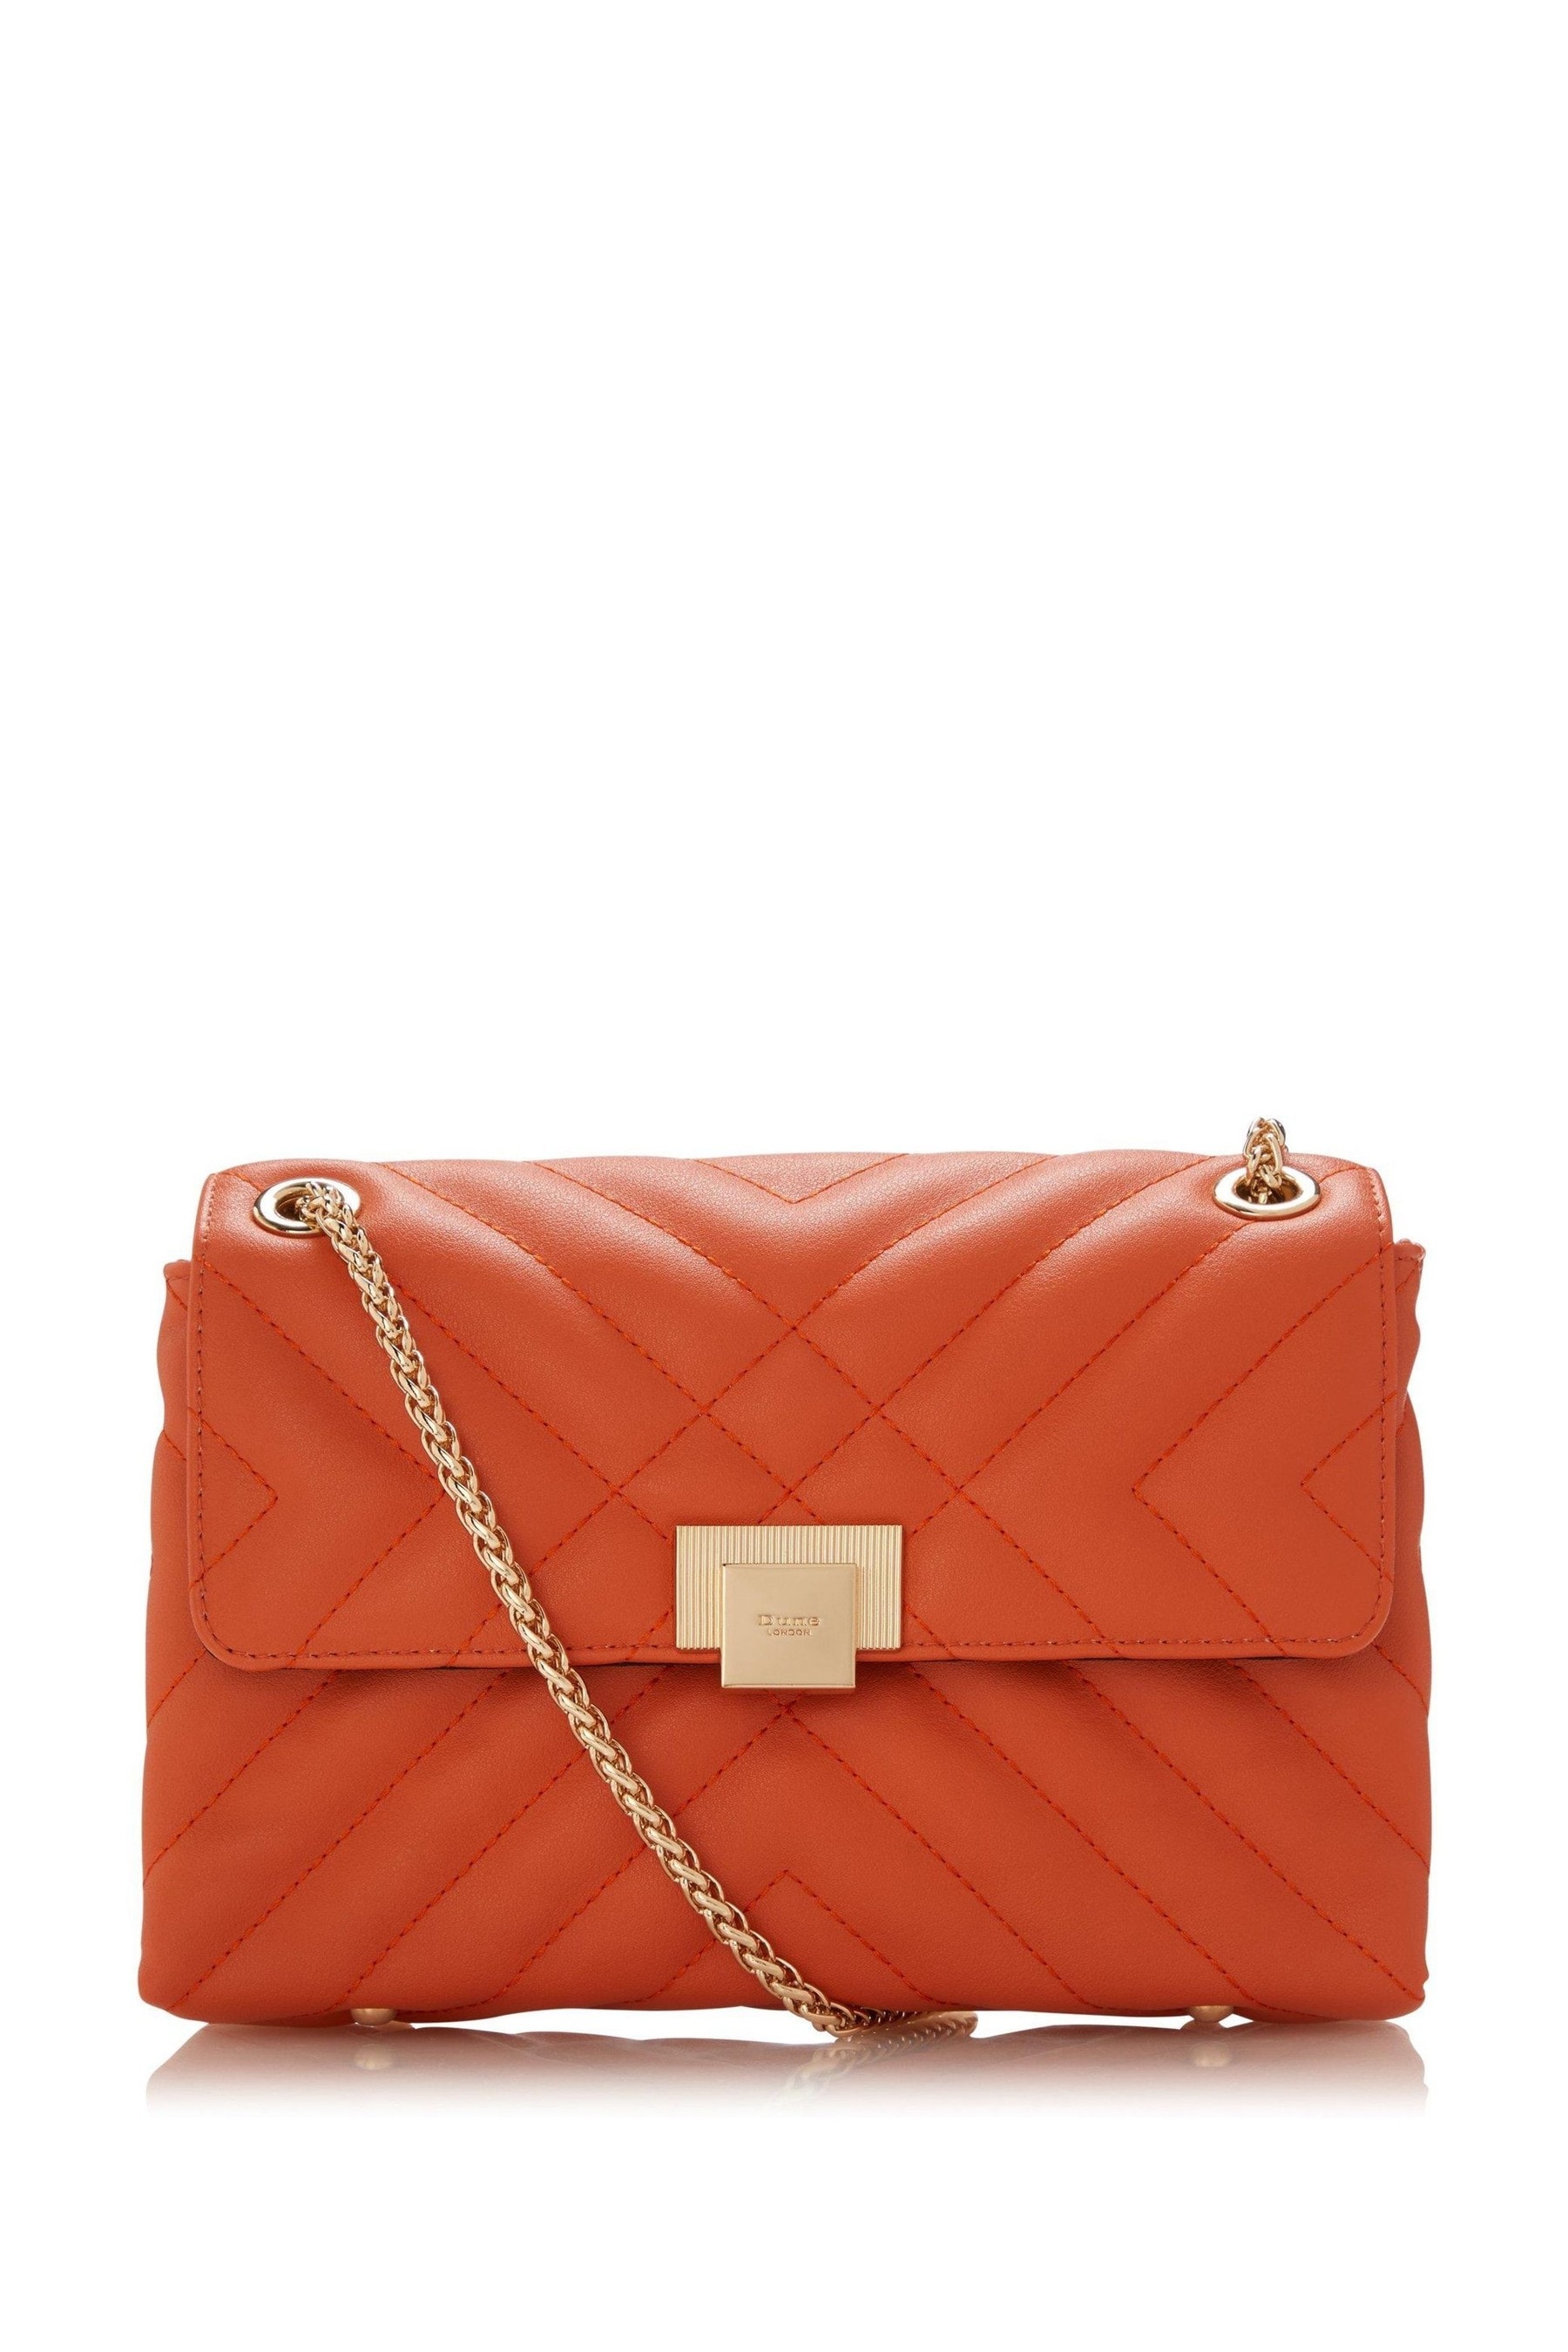 Buy Dune London Orange Dorchester Small Quilted Shoulder Bag from the ...